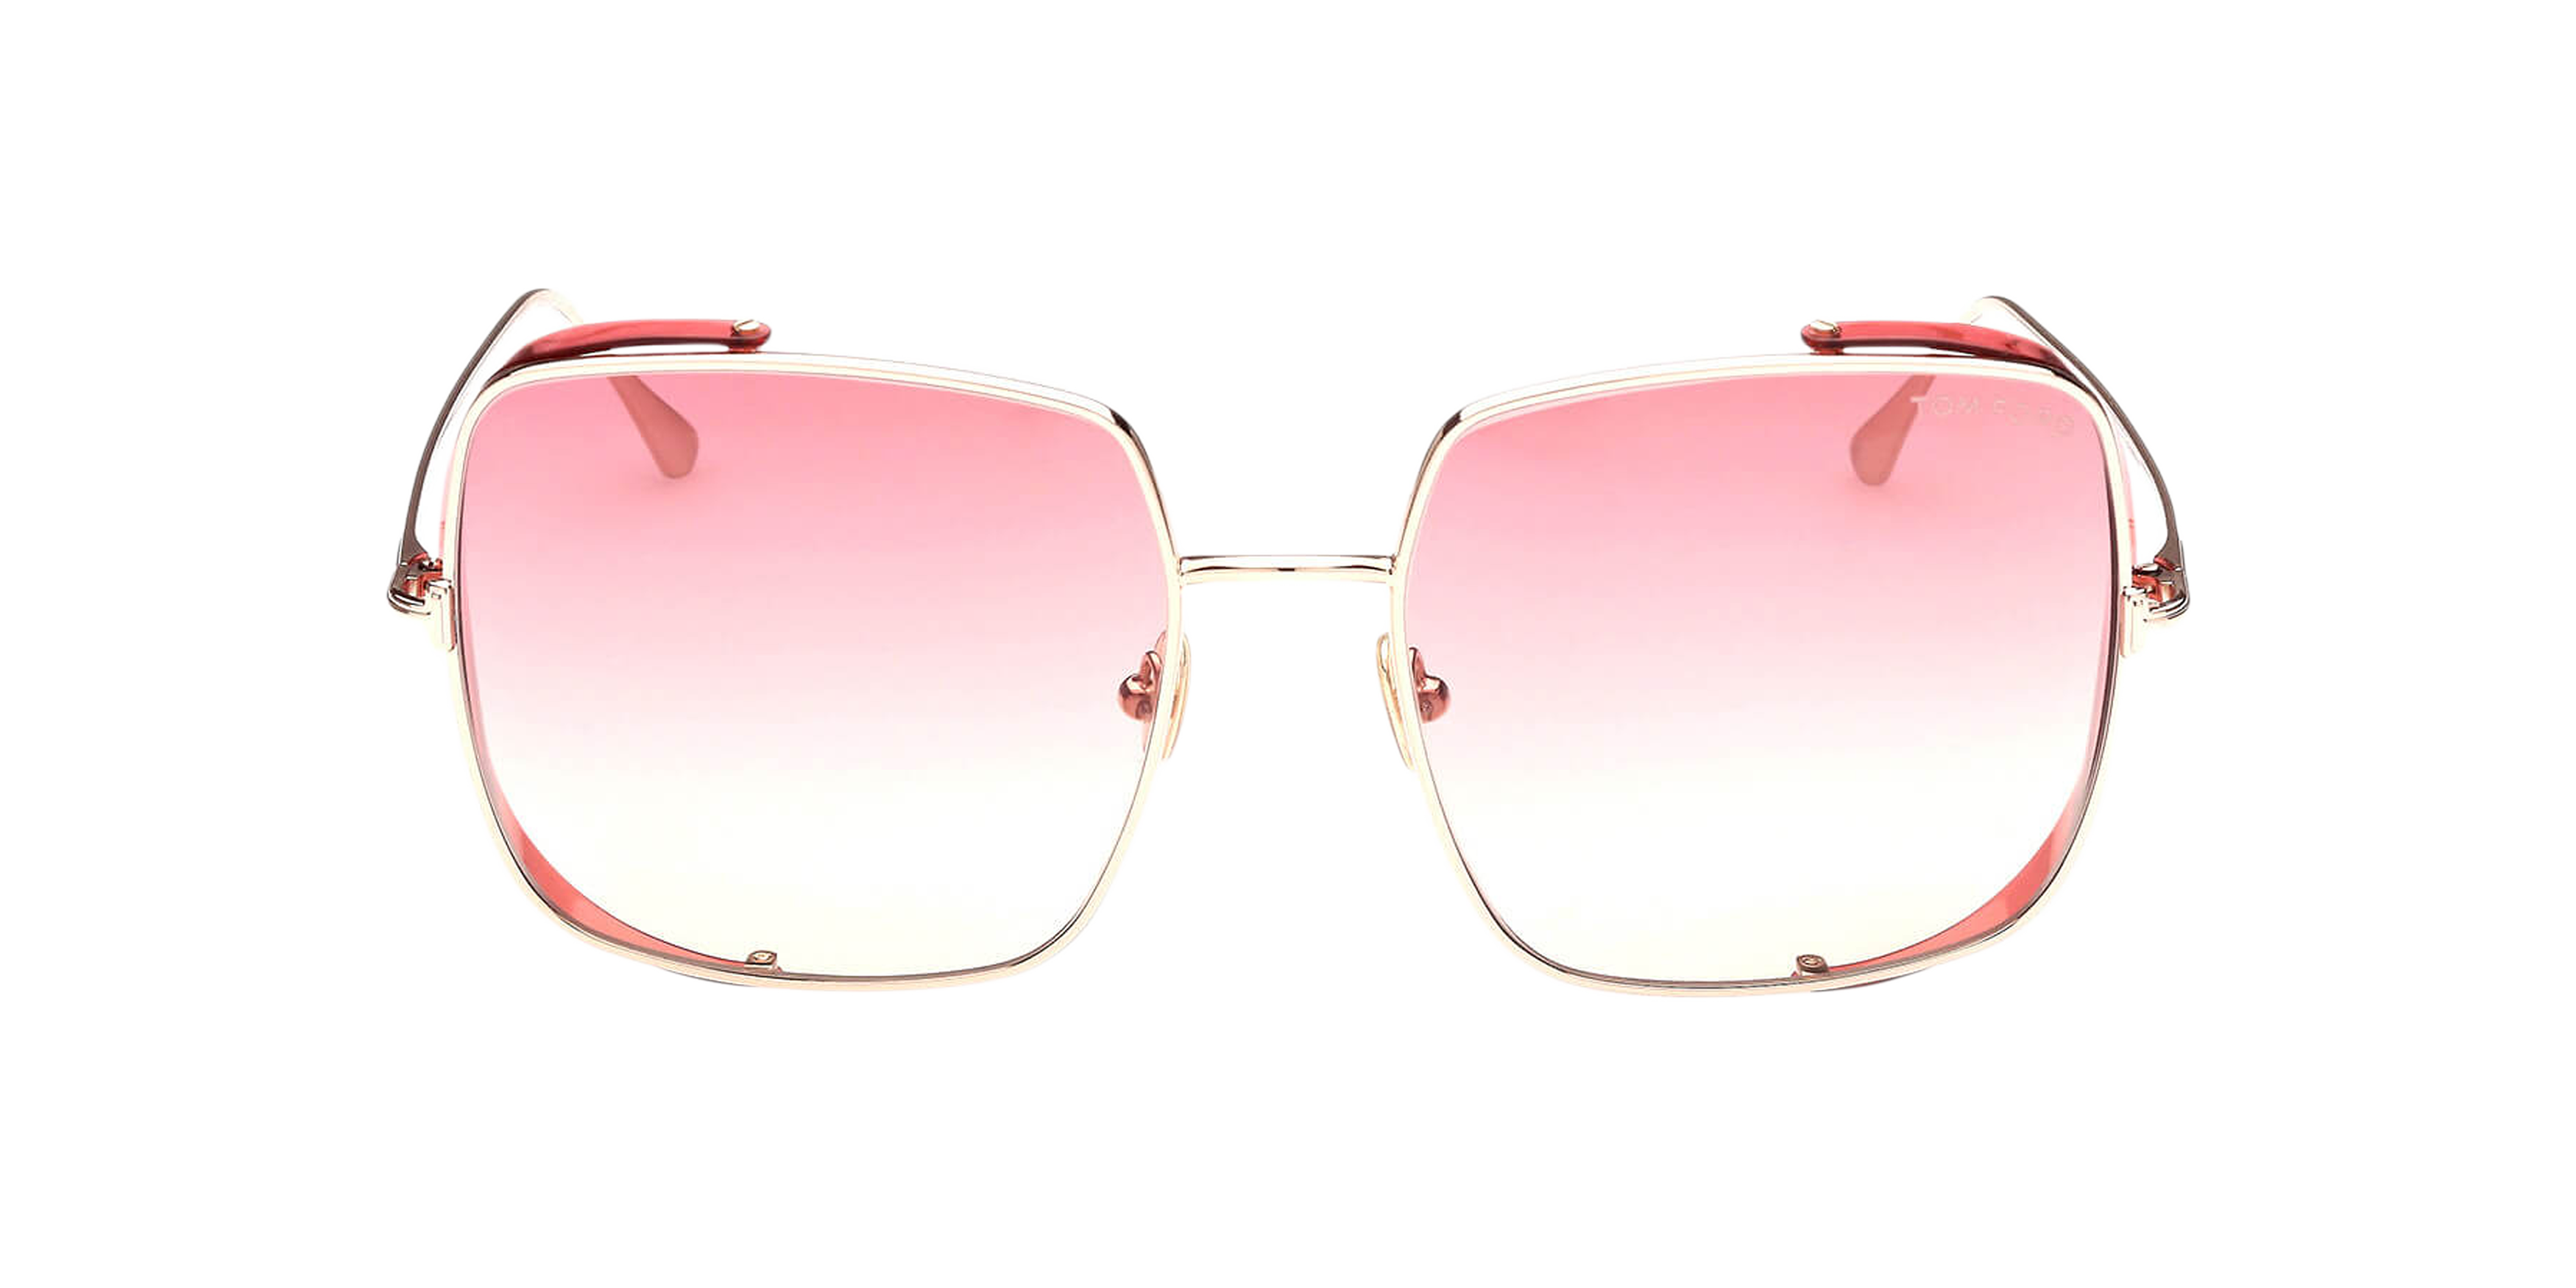 Tom Ford Sunglasses for Men and Women Vision Express